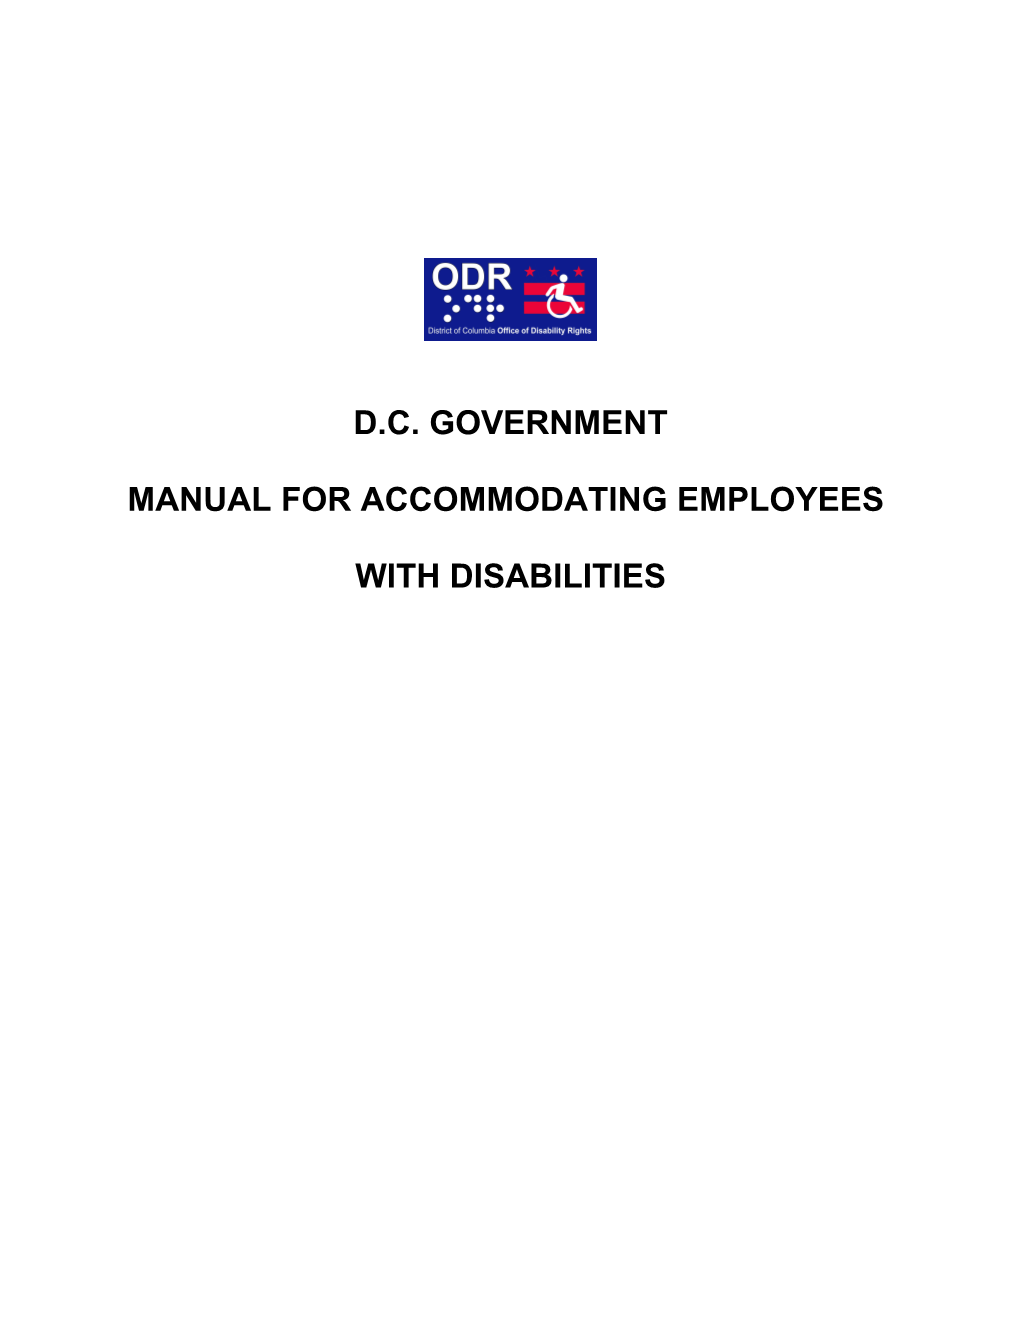 The District of Columbia Reasonable Accommodation Guidelines for People with Disabilities